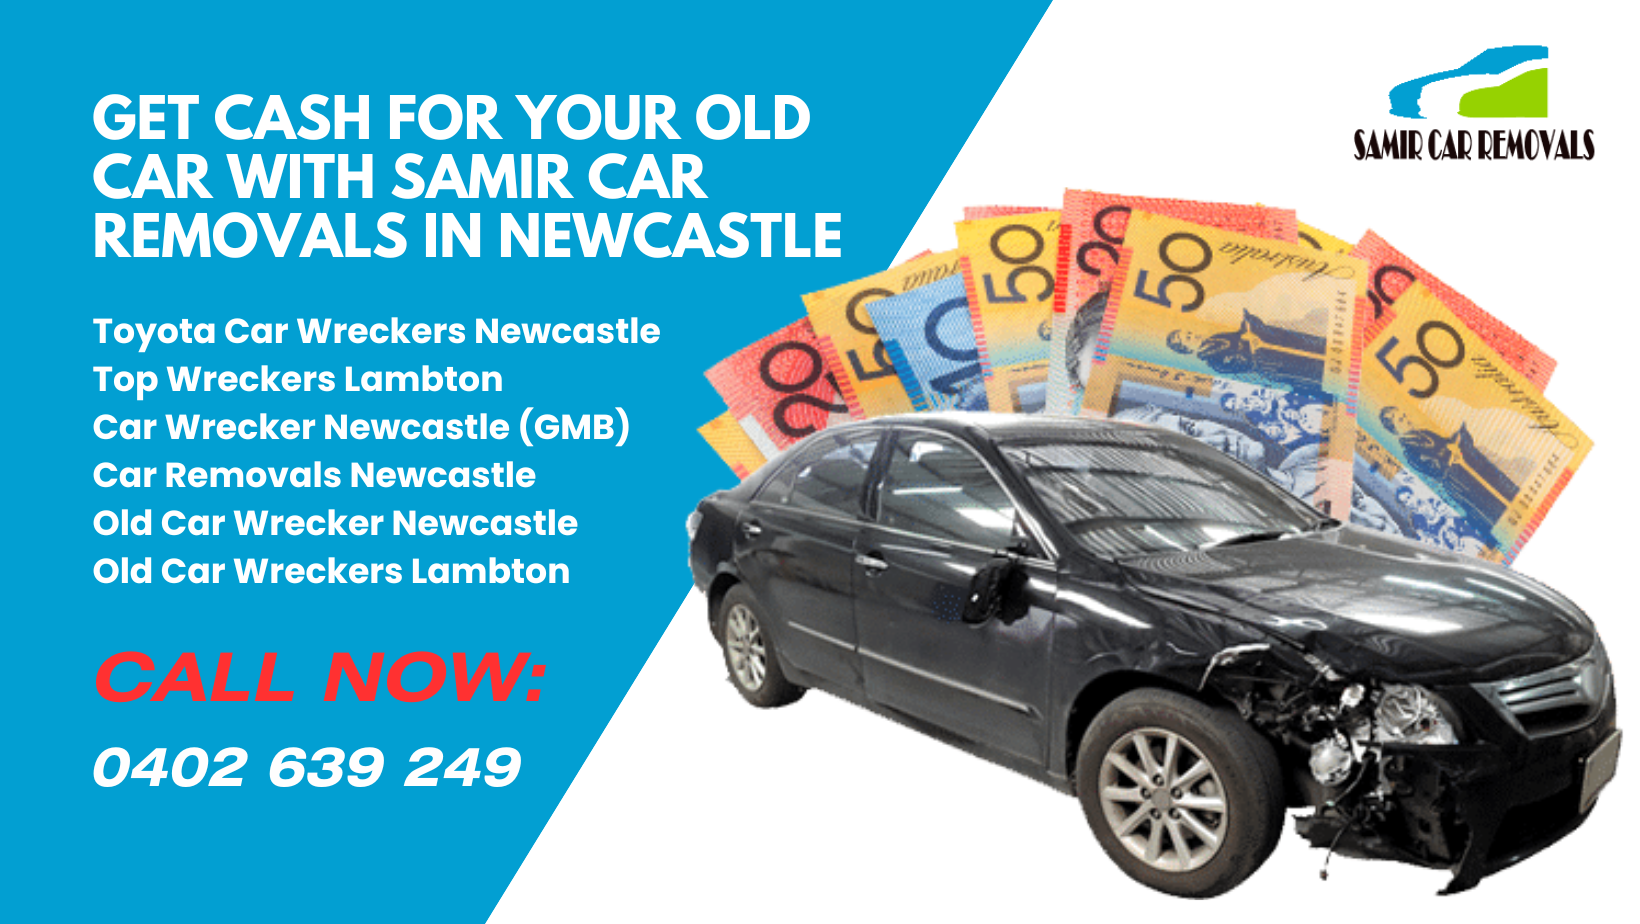 Get Cash For Your Old Car With Samir Car Removals in Newcastle